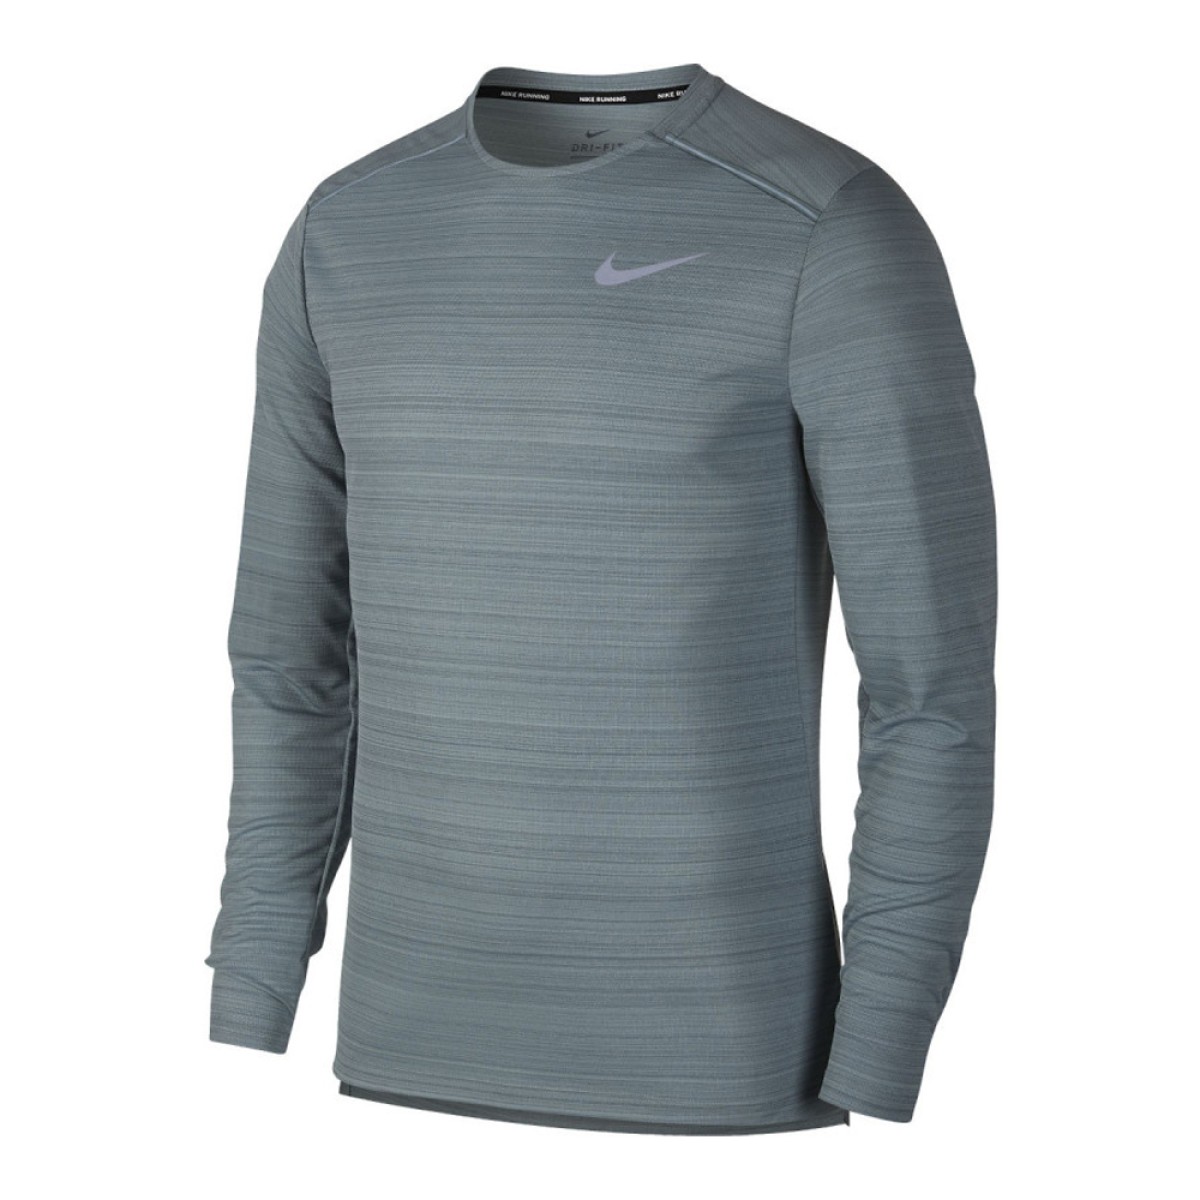 Layer up in the Nike Dri-FIT Miler Men's Long-Sleeve Running Top. Sweat ...